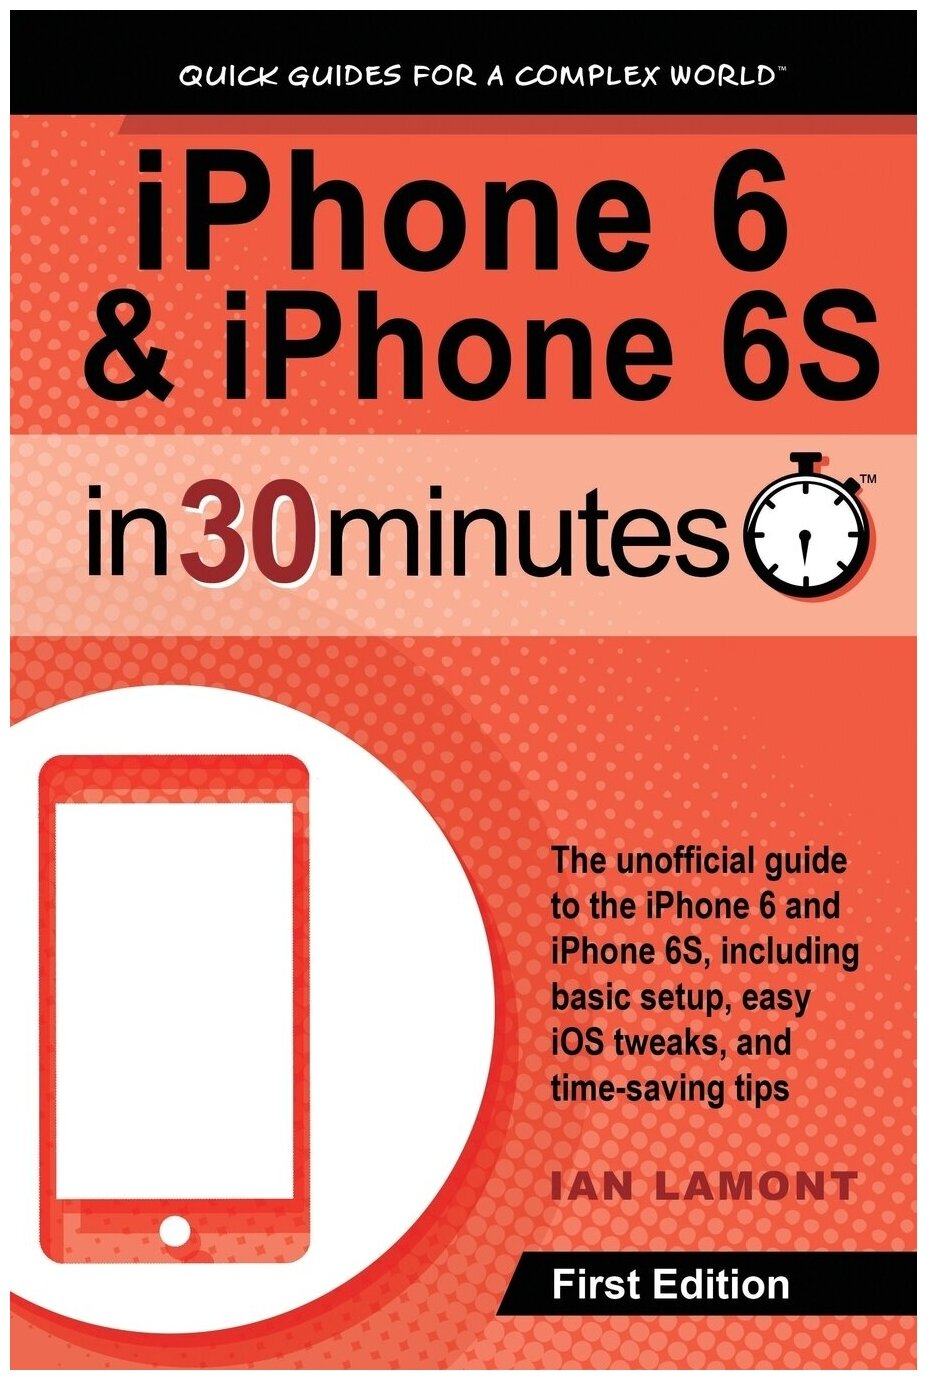 IPhone 6 & iPhone 6S In 30 Minutes. The unofficial guide to the iPhone 6 and iPhone 6S, including basic setup, easy iOS tweaks, and time-saving tips